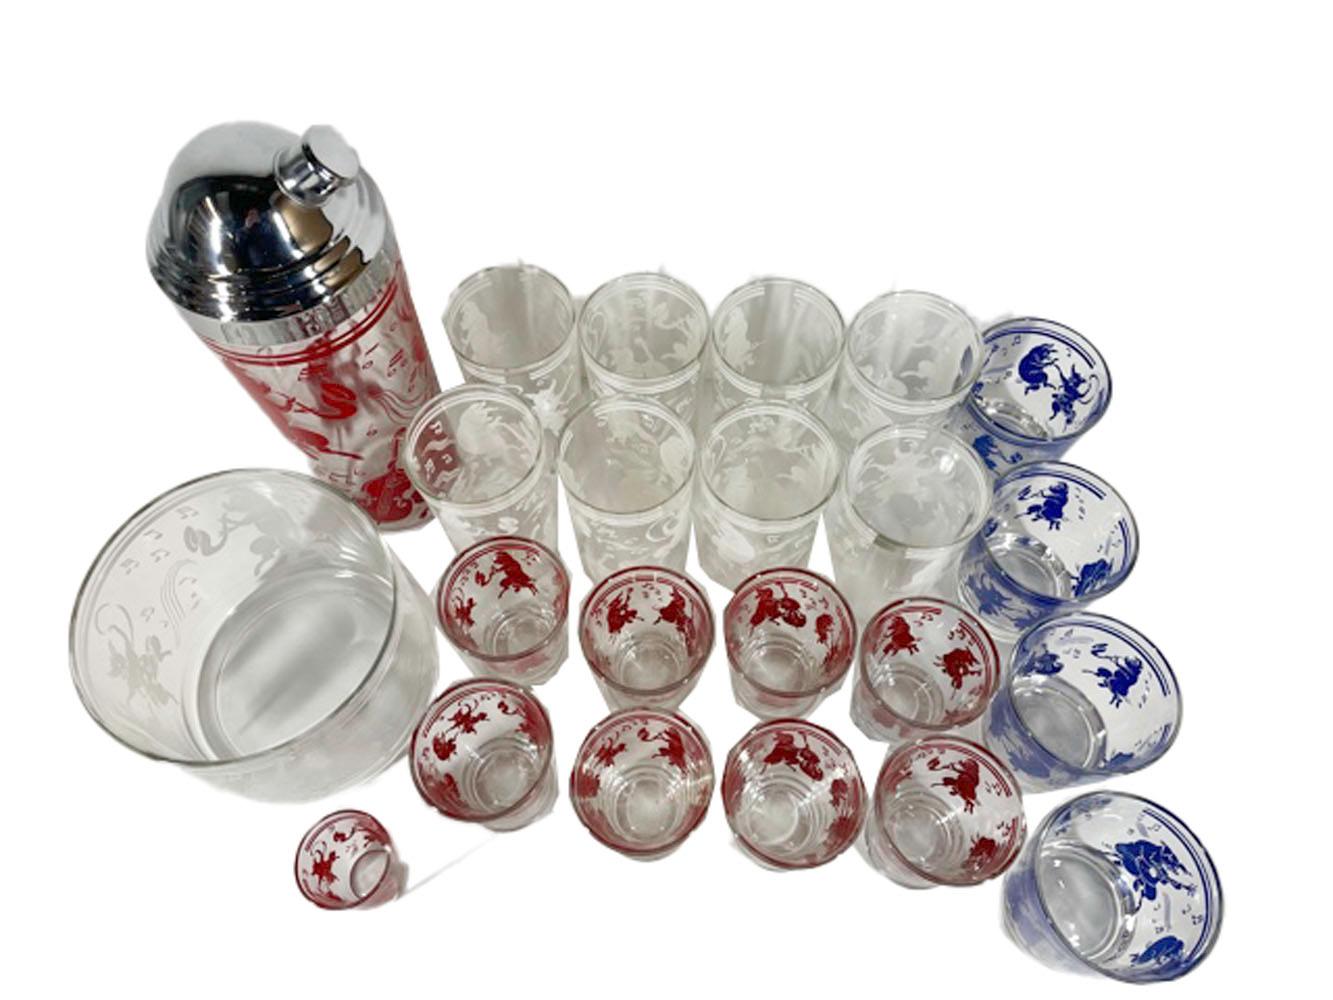 Vintage Hazel Atlas musical pigs cocktail set, usually executed in pink, this set was issued with each piece decorated in either red, white or blue. Decorated with pigs playing musical instruments and dancing, this set with its enamel bright and